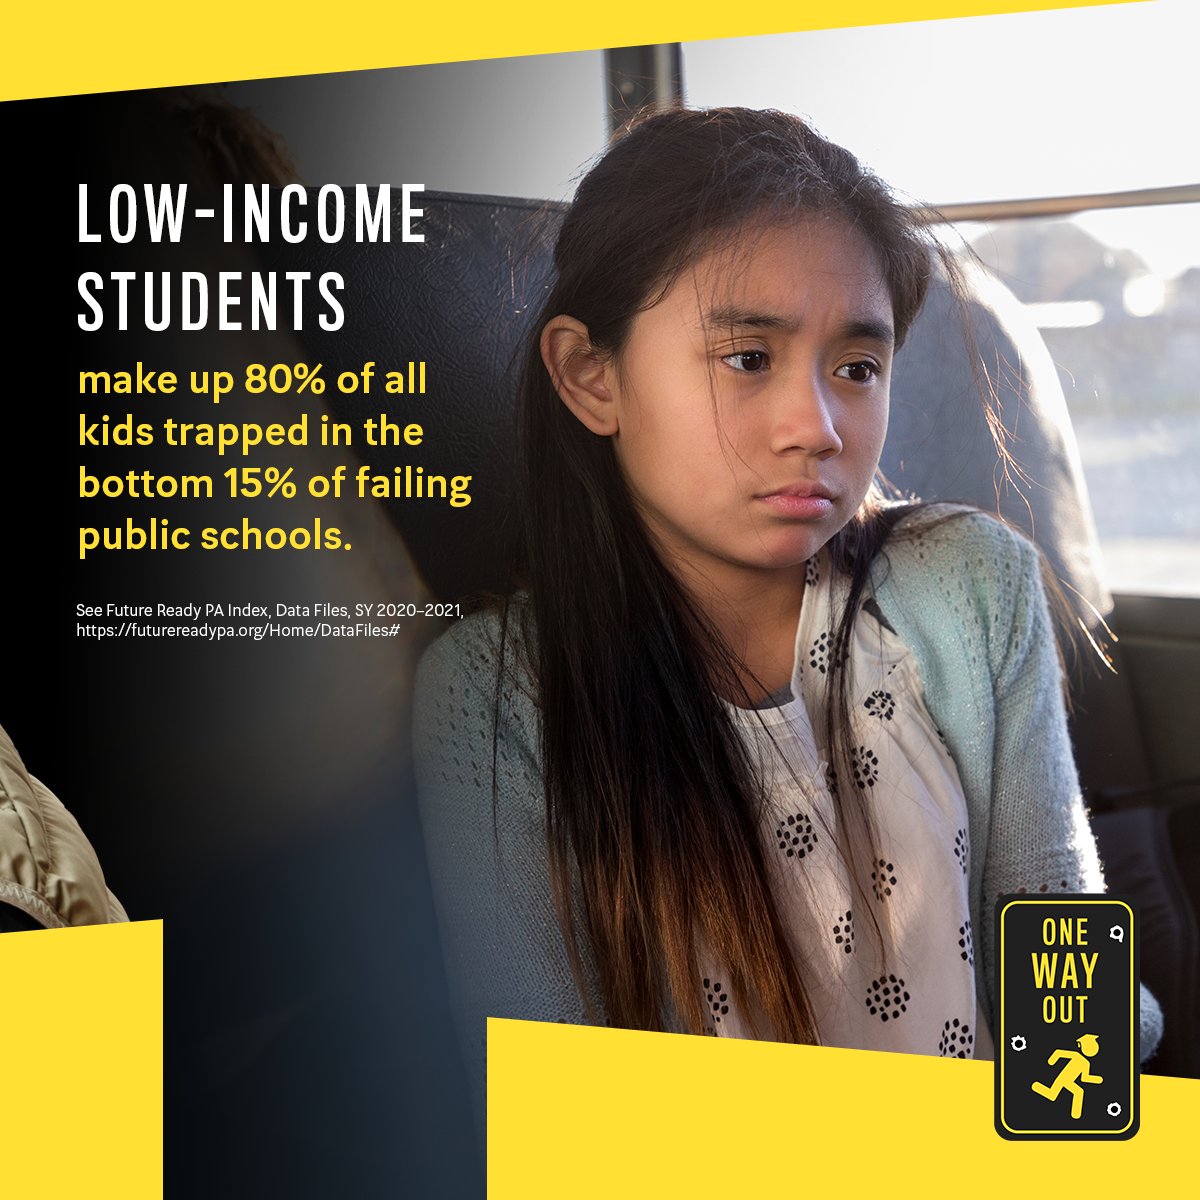 Equitable opportunities for students particularly those of color and low-income backgrounds are lacking. They need #OneWayOut #LifelineScholarships help save our children's futures. 🎓#EquityForAll #BridgetheGap
onewayoutpa.com